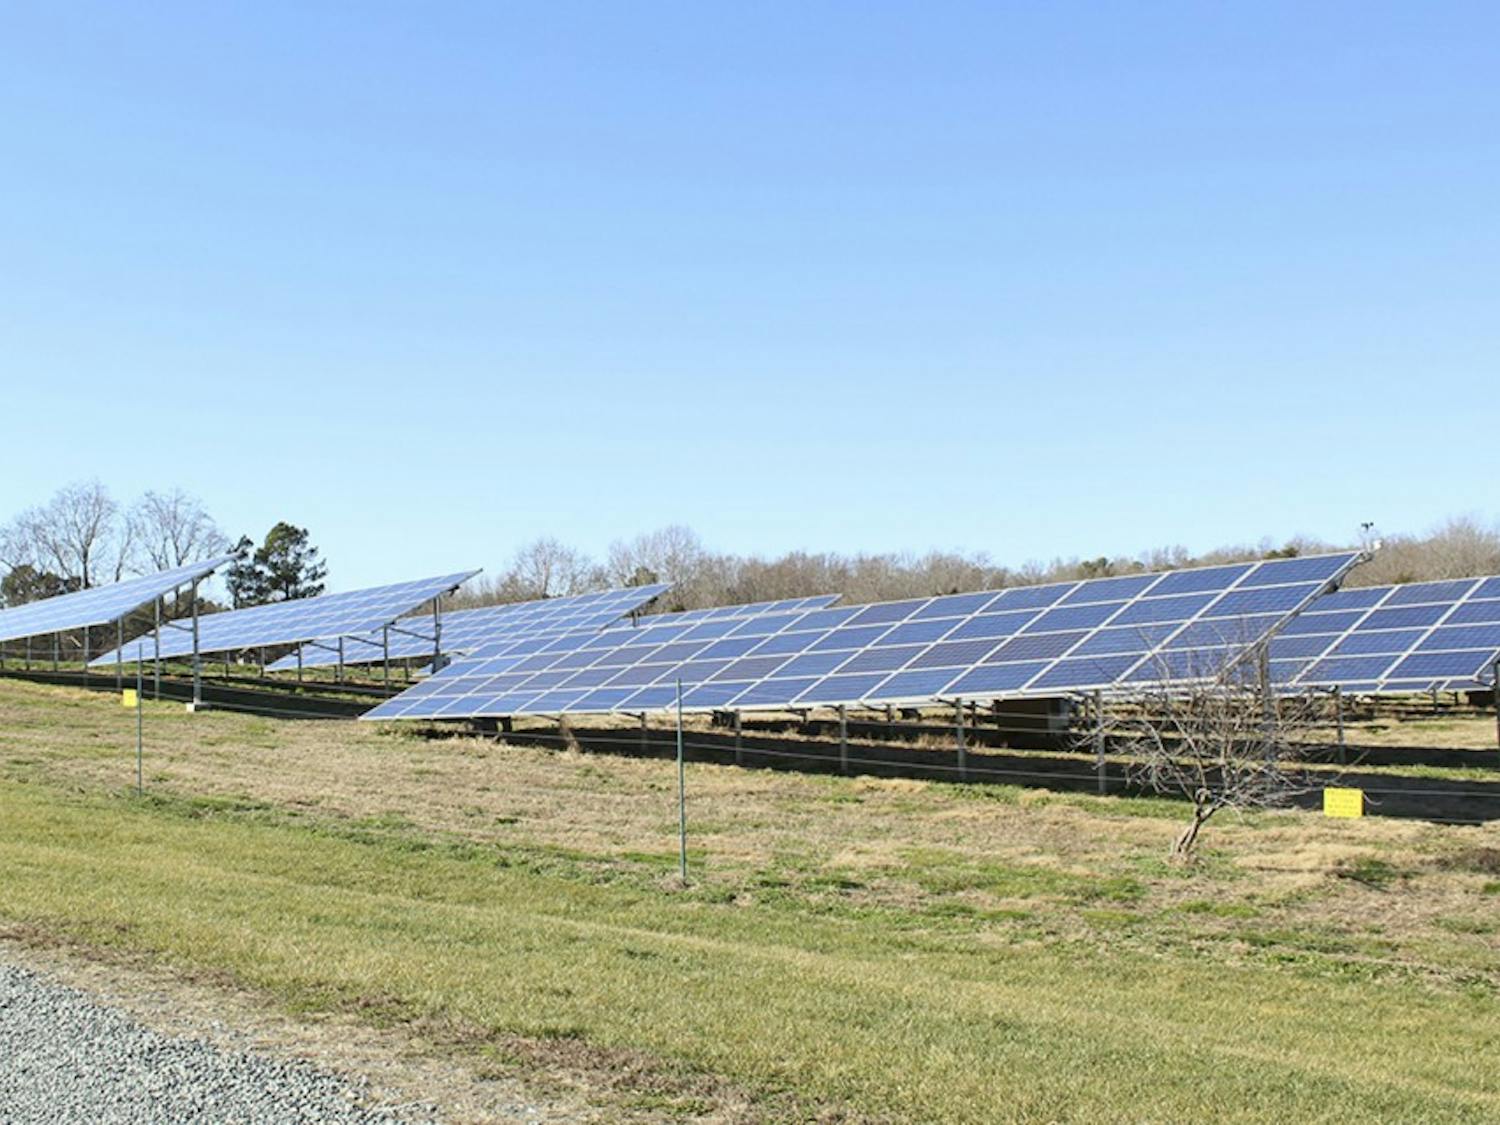 In a recent report, Raleigh ranked among the top 20 cities nationwide for solar power per capita.&nbsp;